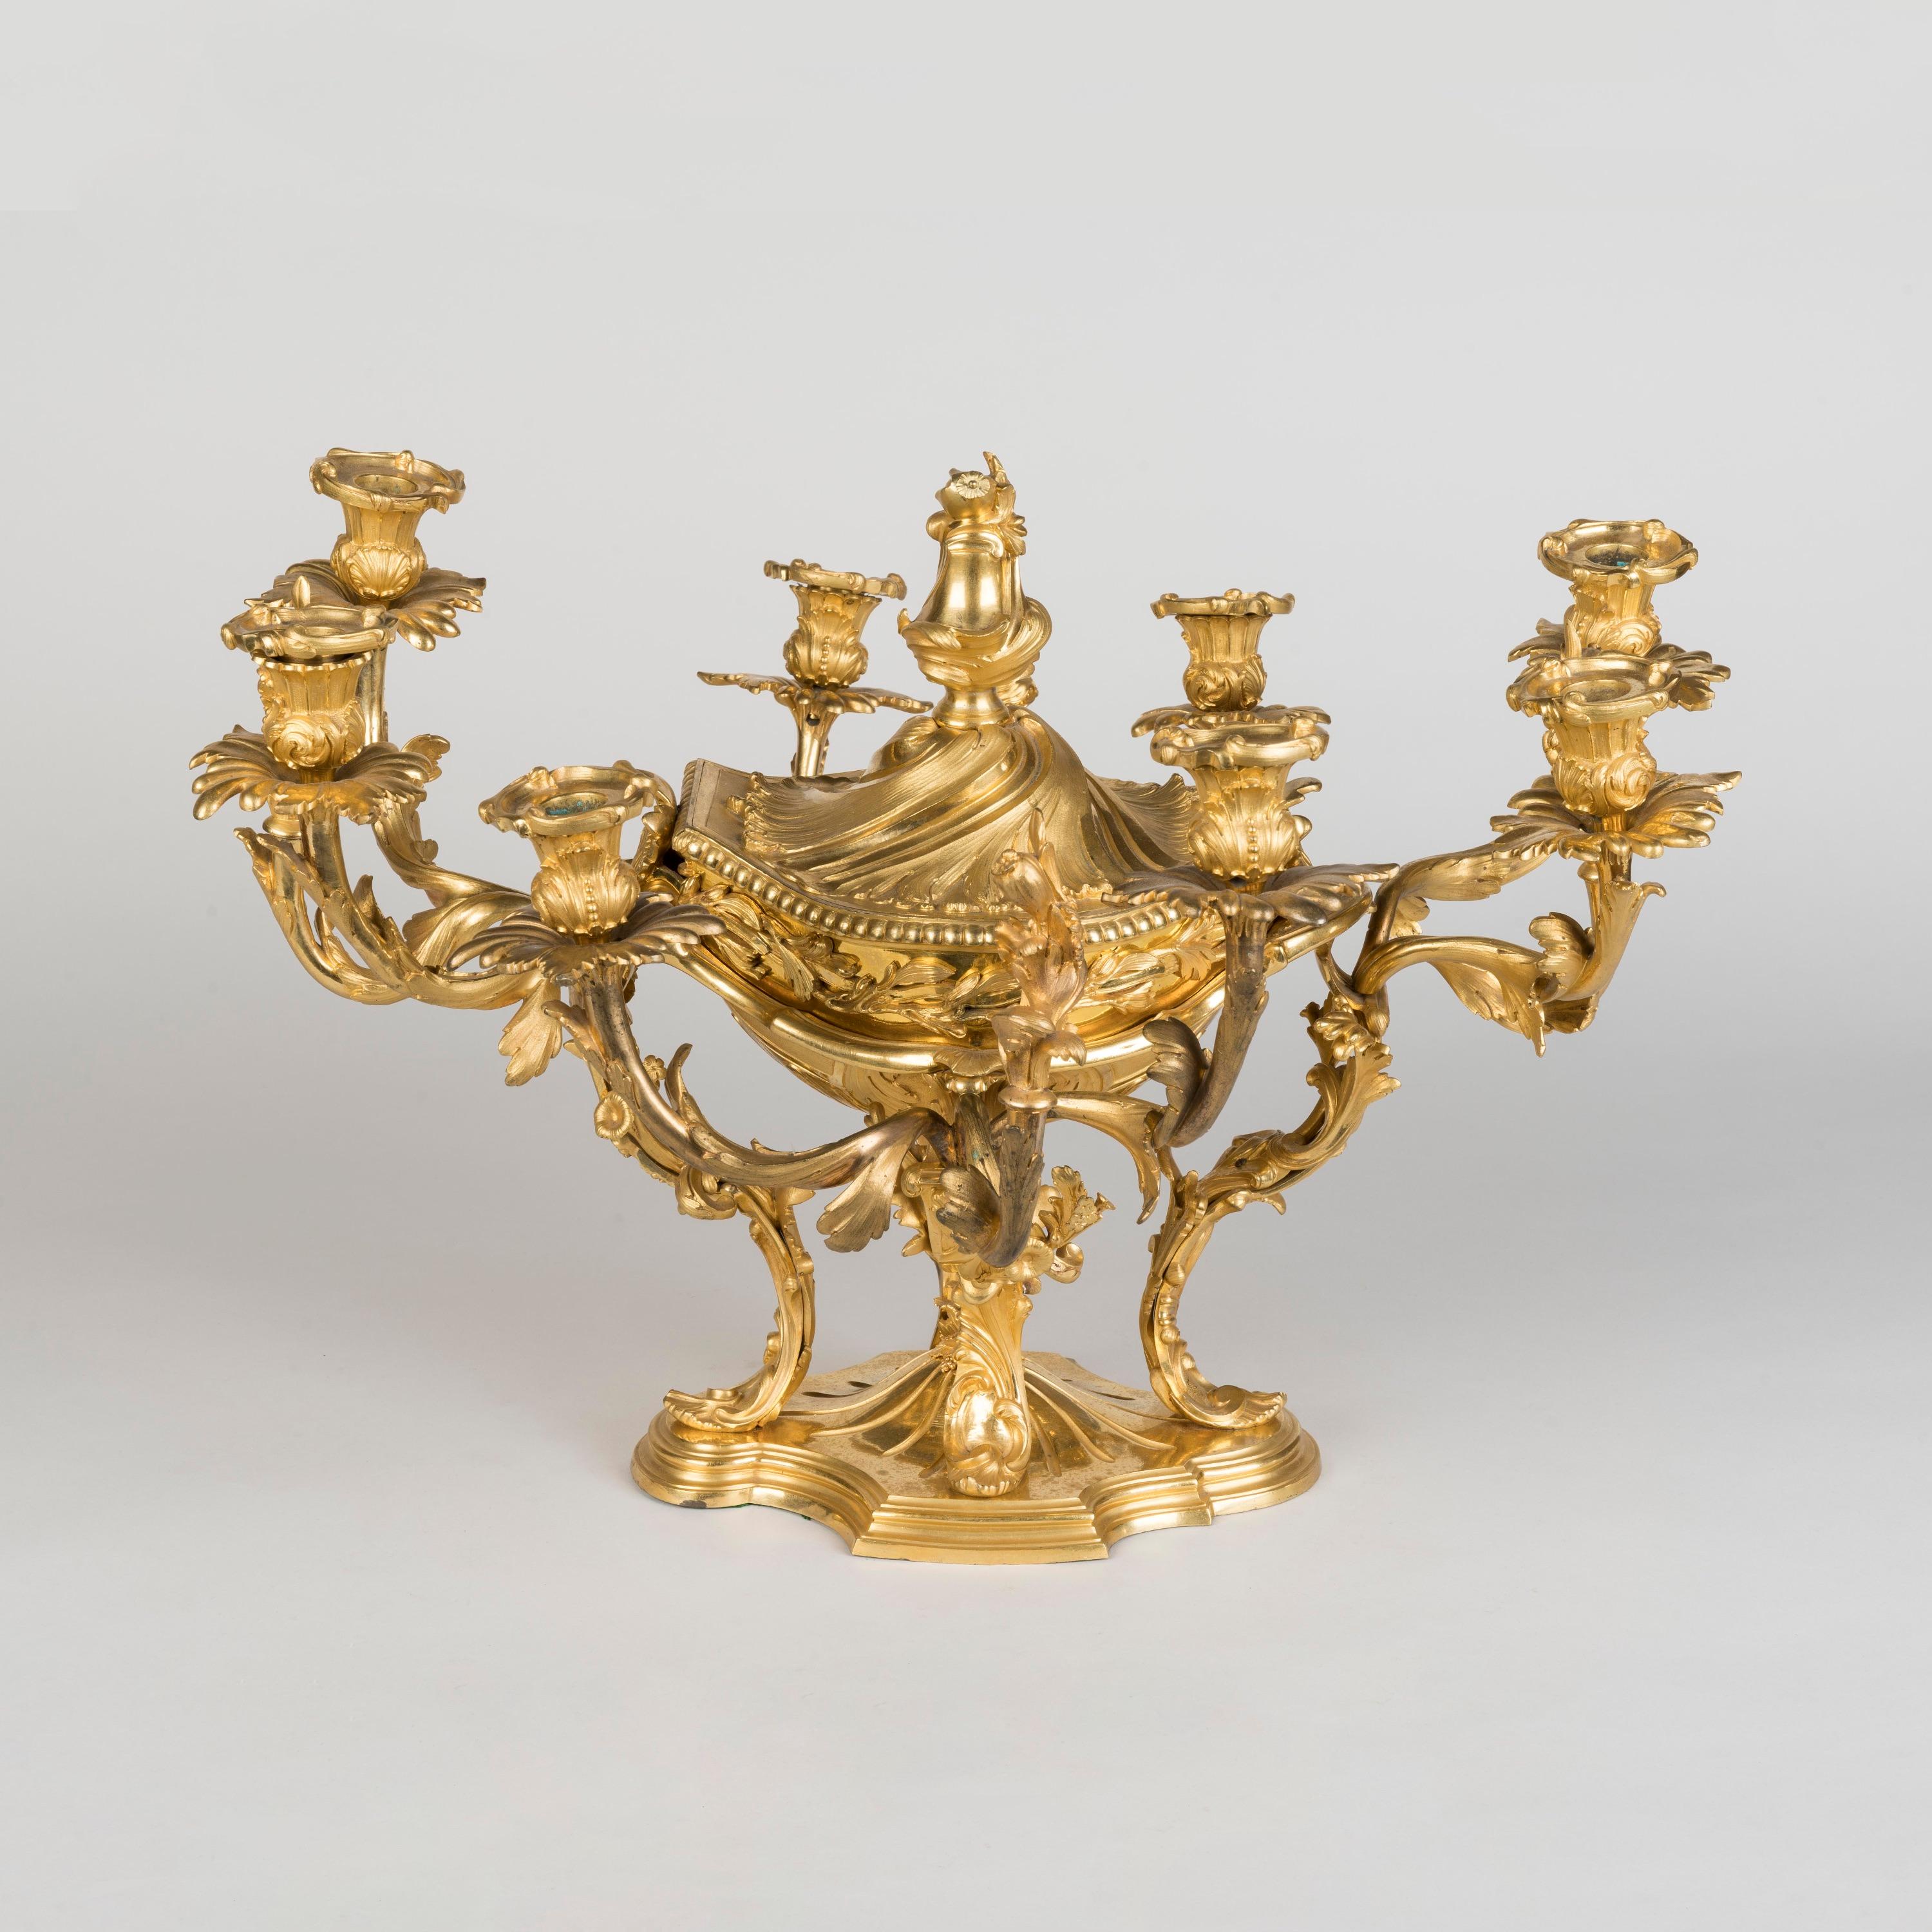 An Ormolu centrepiece in the Rococo Manner

Constructed in gilt bronze of refined casting and finished with burnished surfacing, rising from a shaped and moulded plinth, with four acanthus scrolled legs supporting the central lidded bowl, issuing